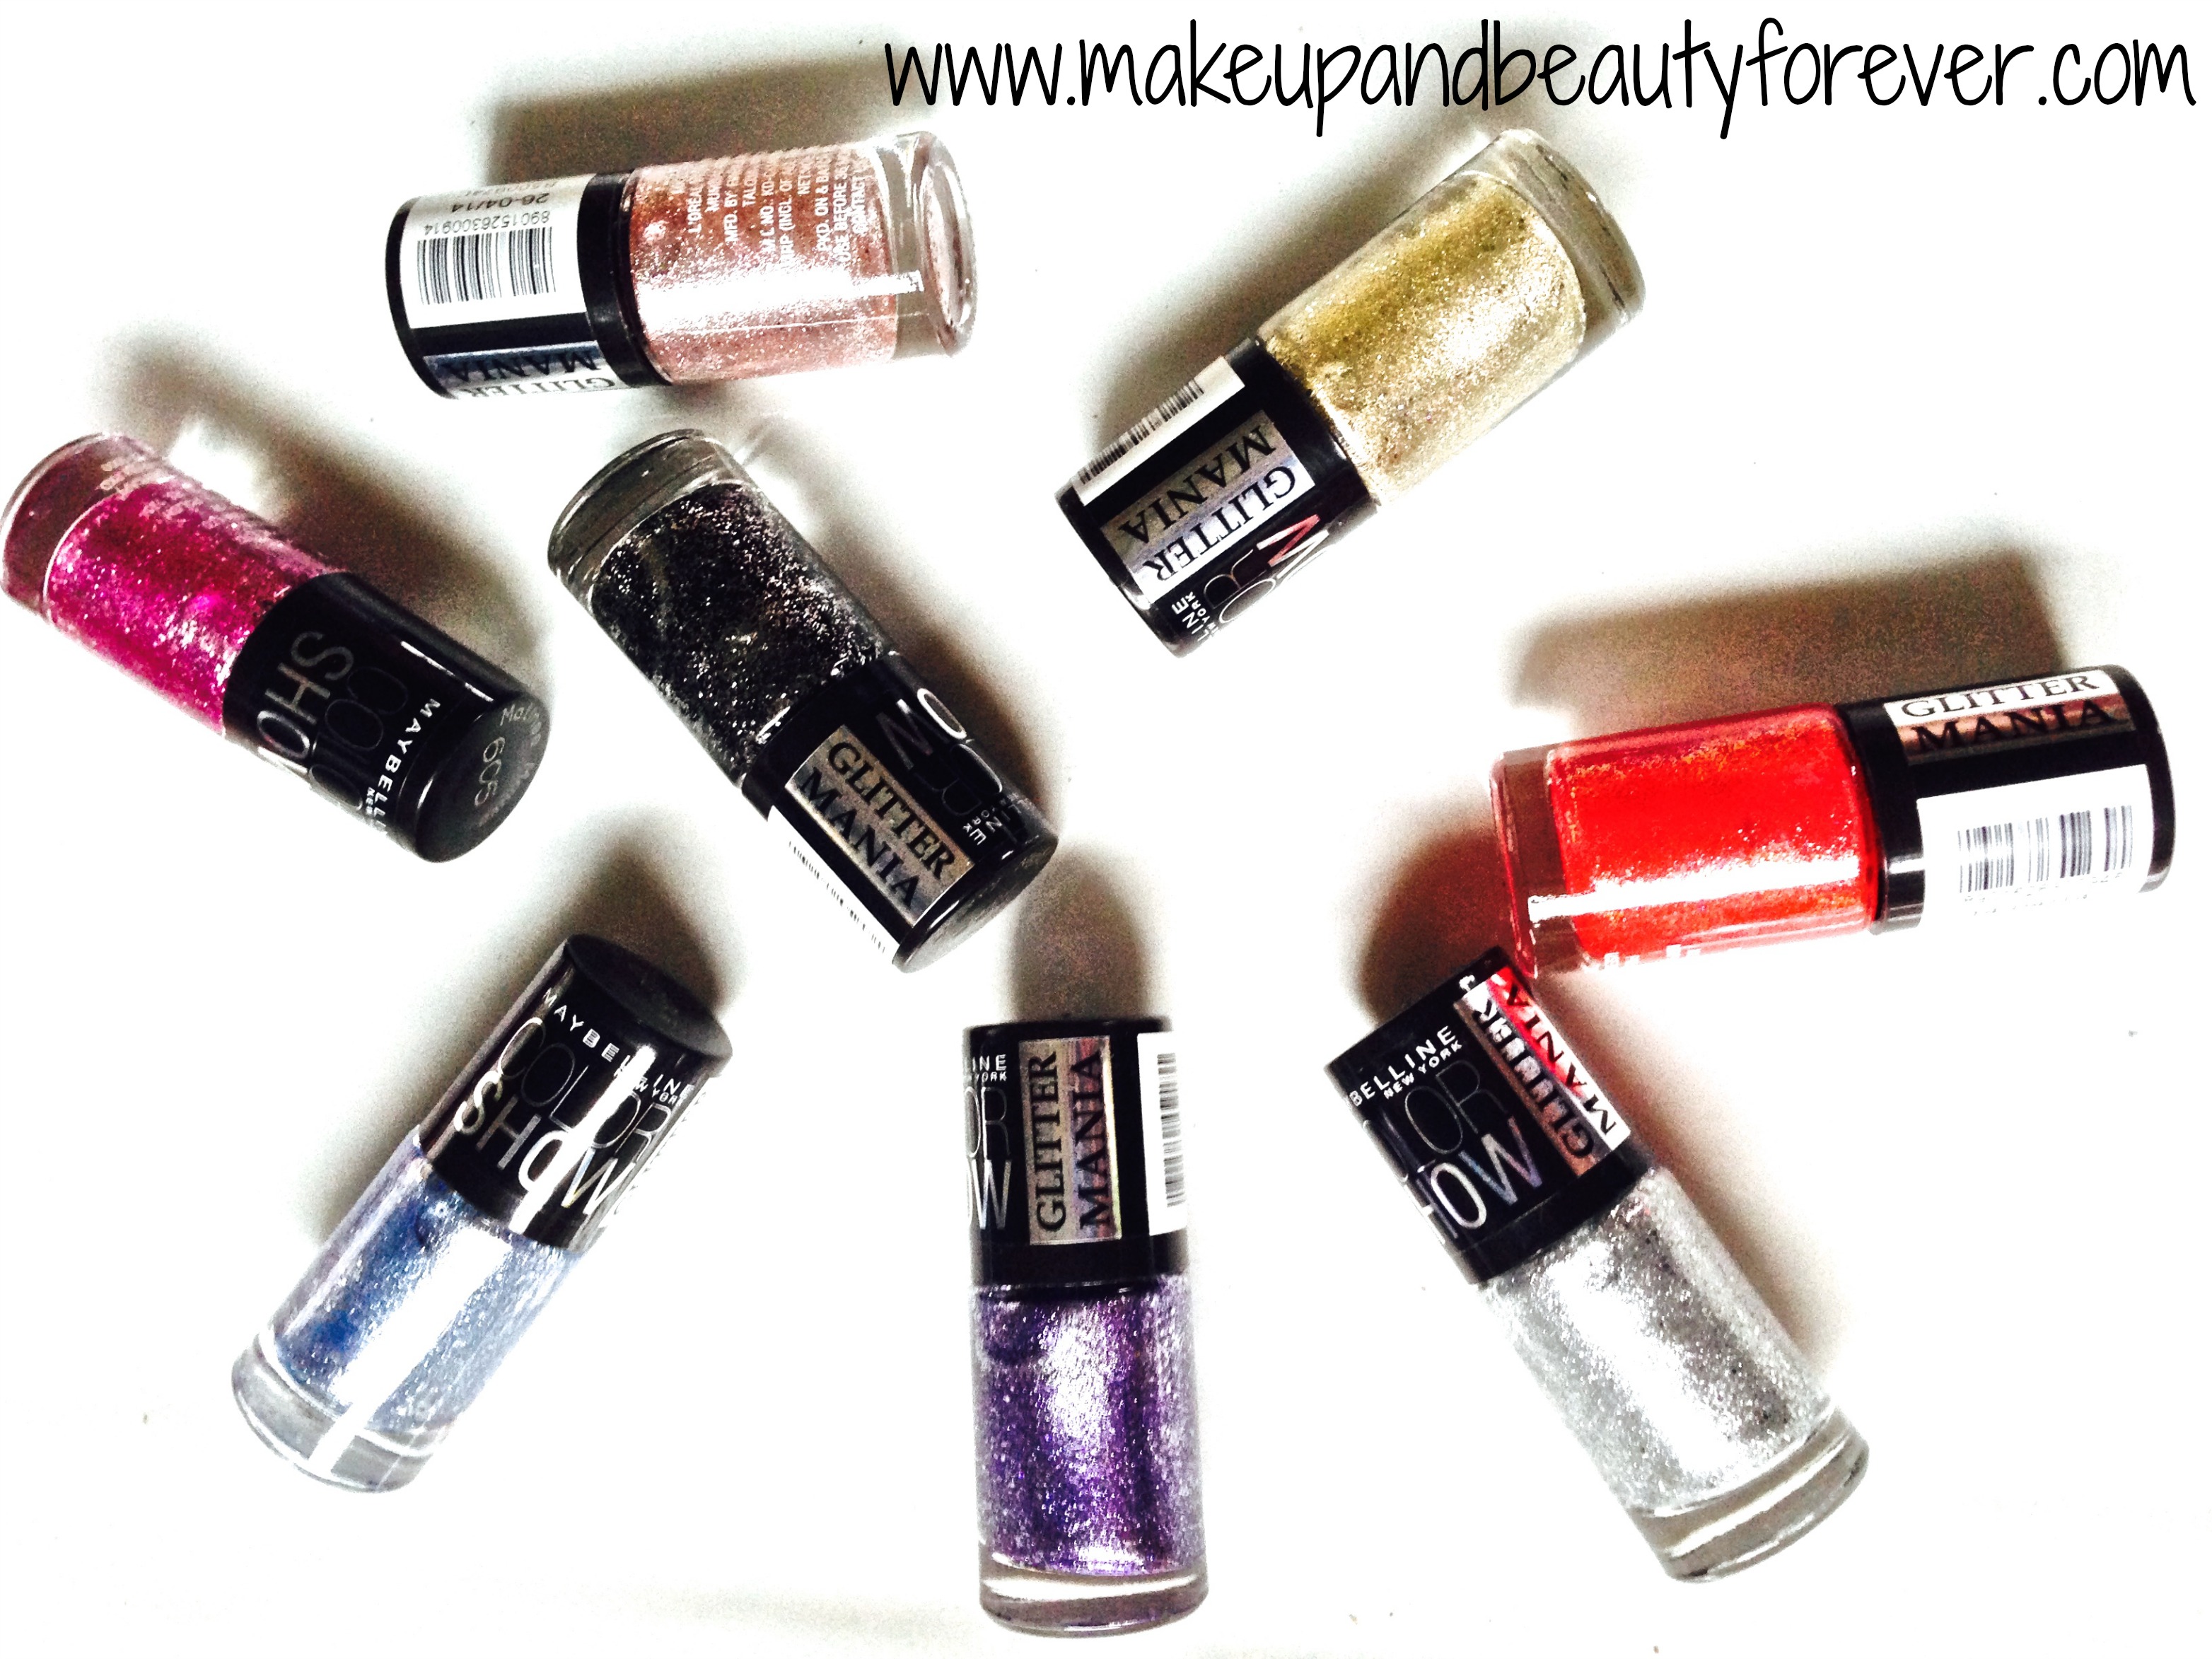 Maybelline Color Show Nail Polish Shredded - wide 9